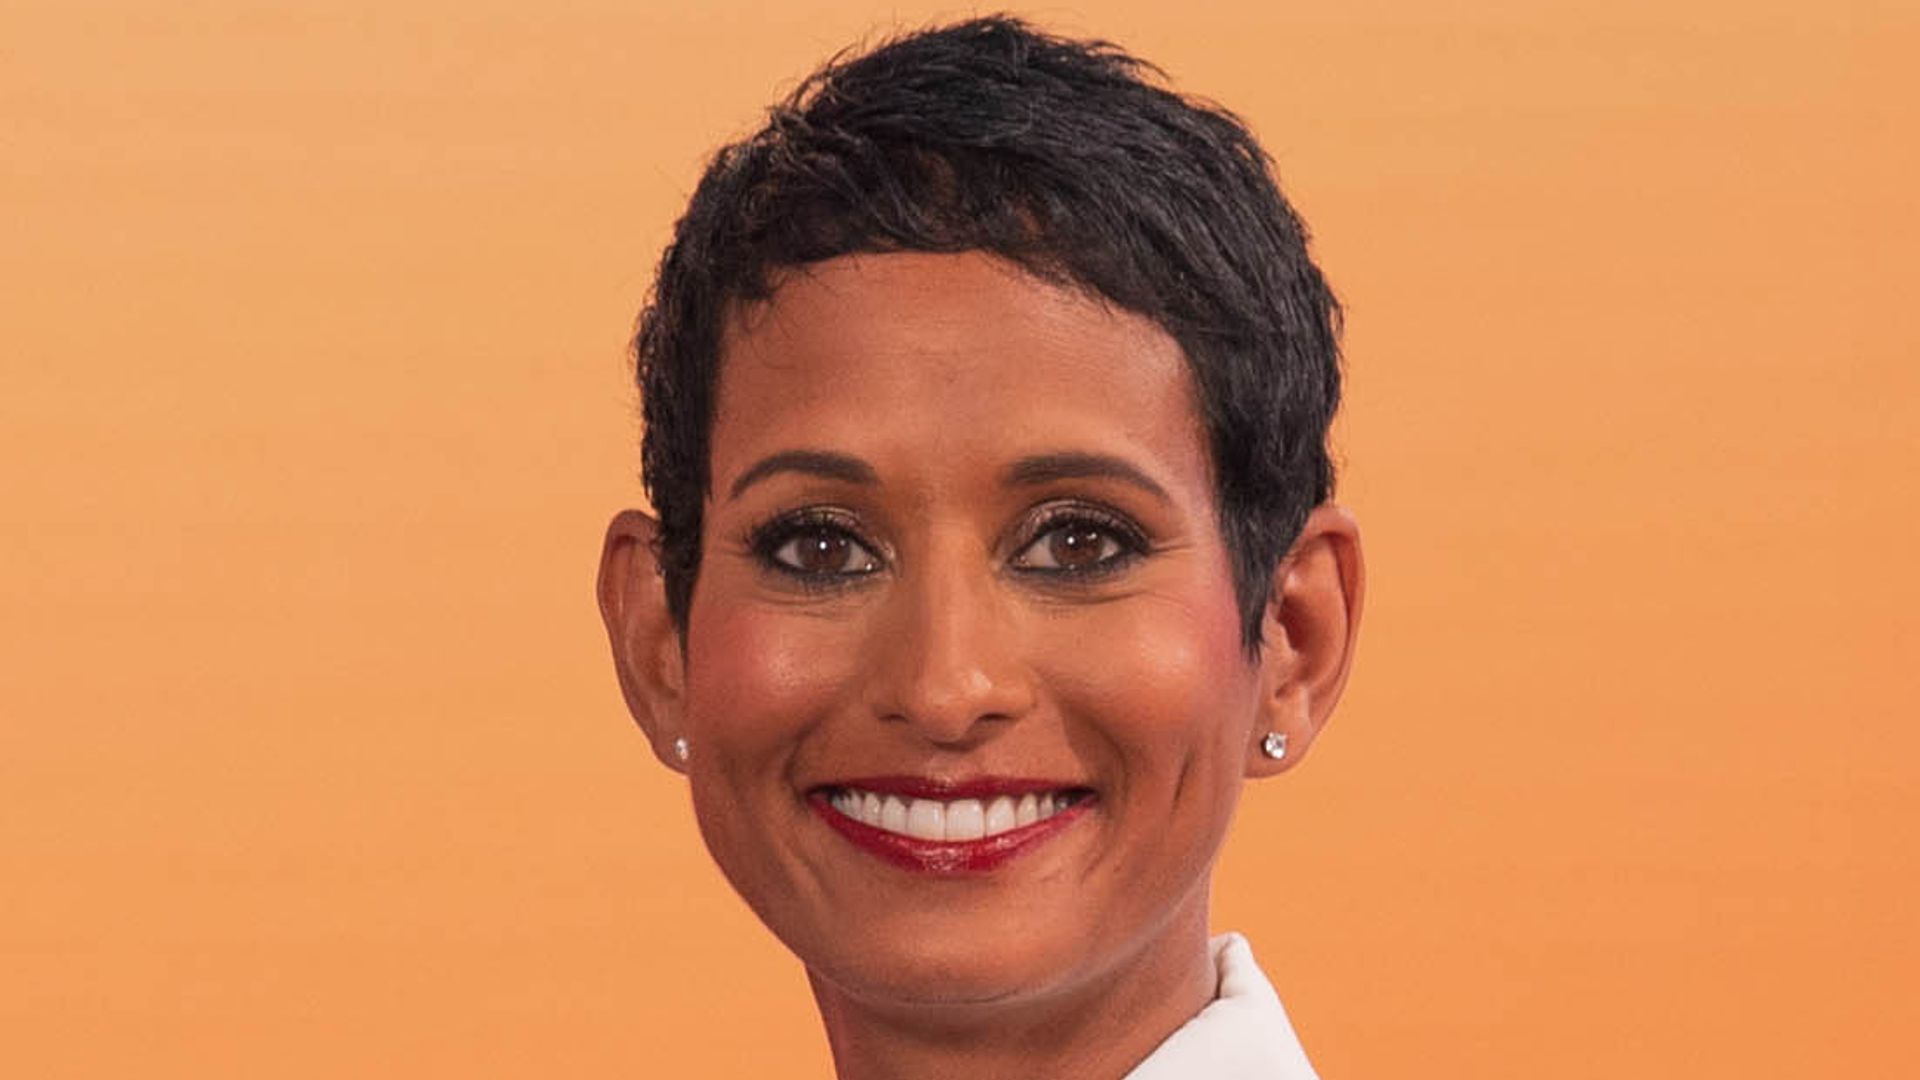 BBC Breakfast's Naga Munchetty wows fans with never-ending legs in thigh-slit dress and heels